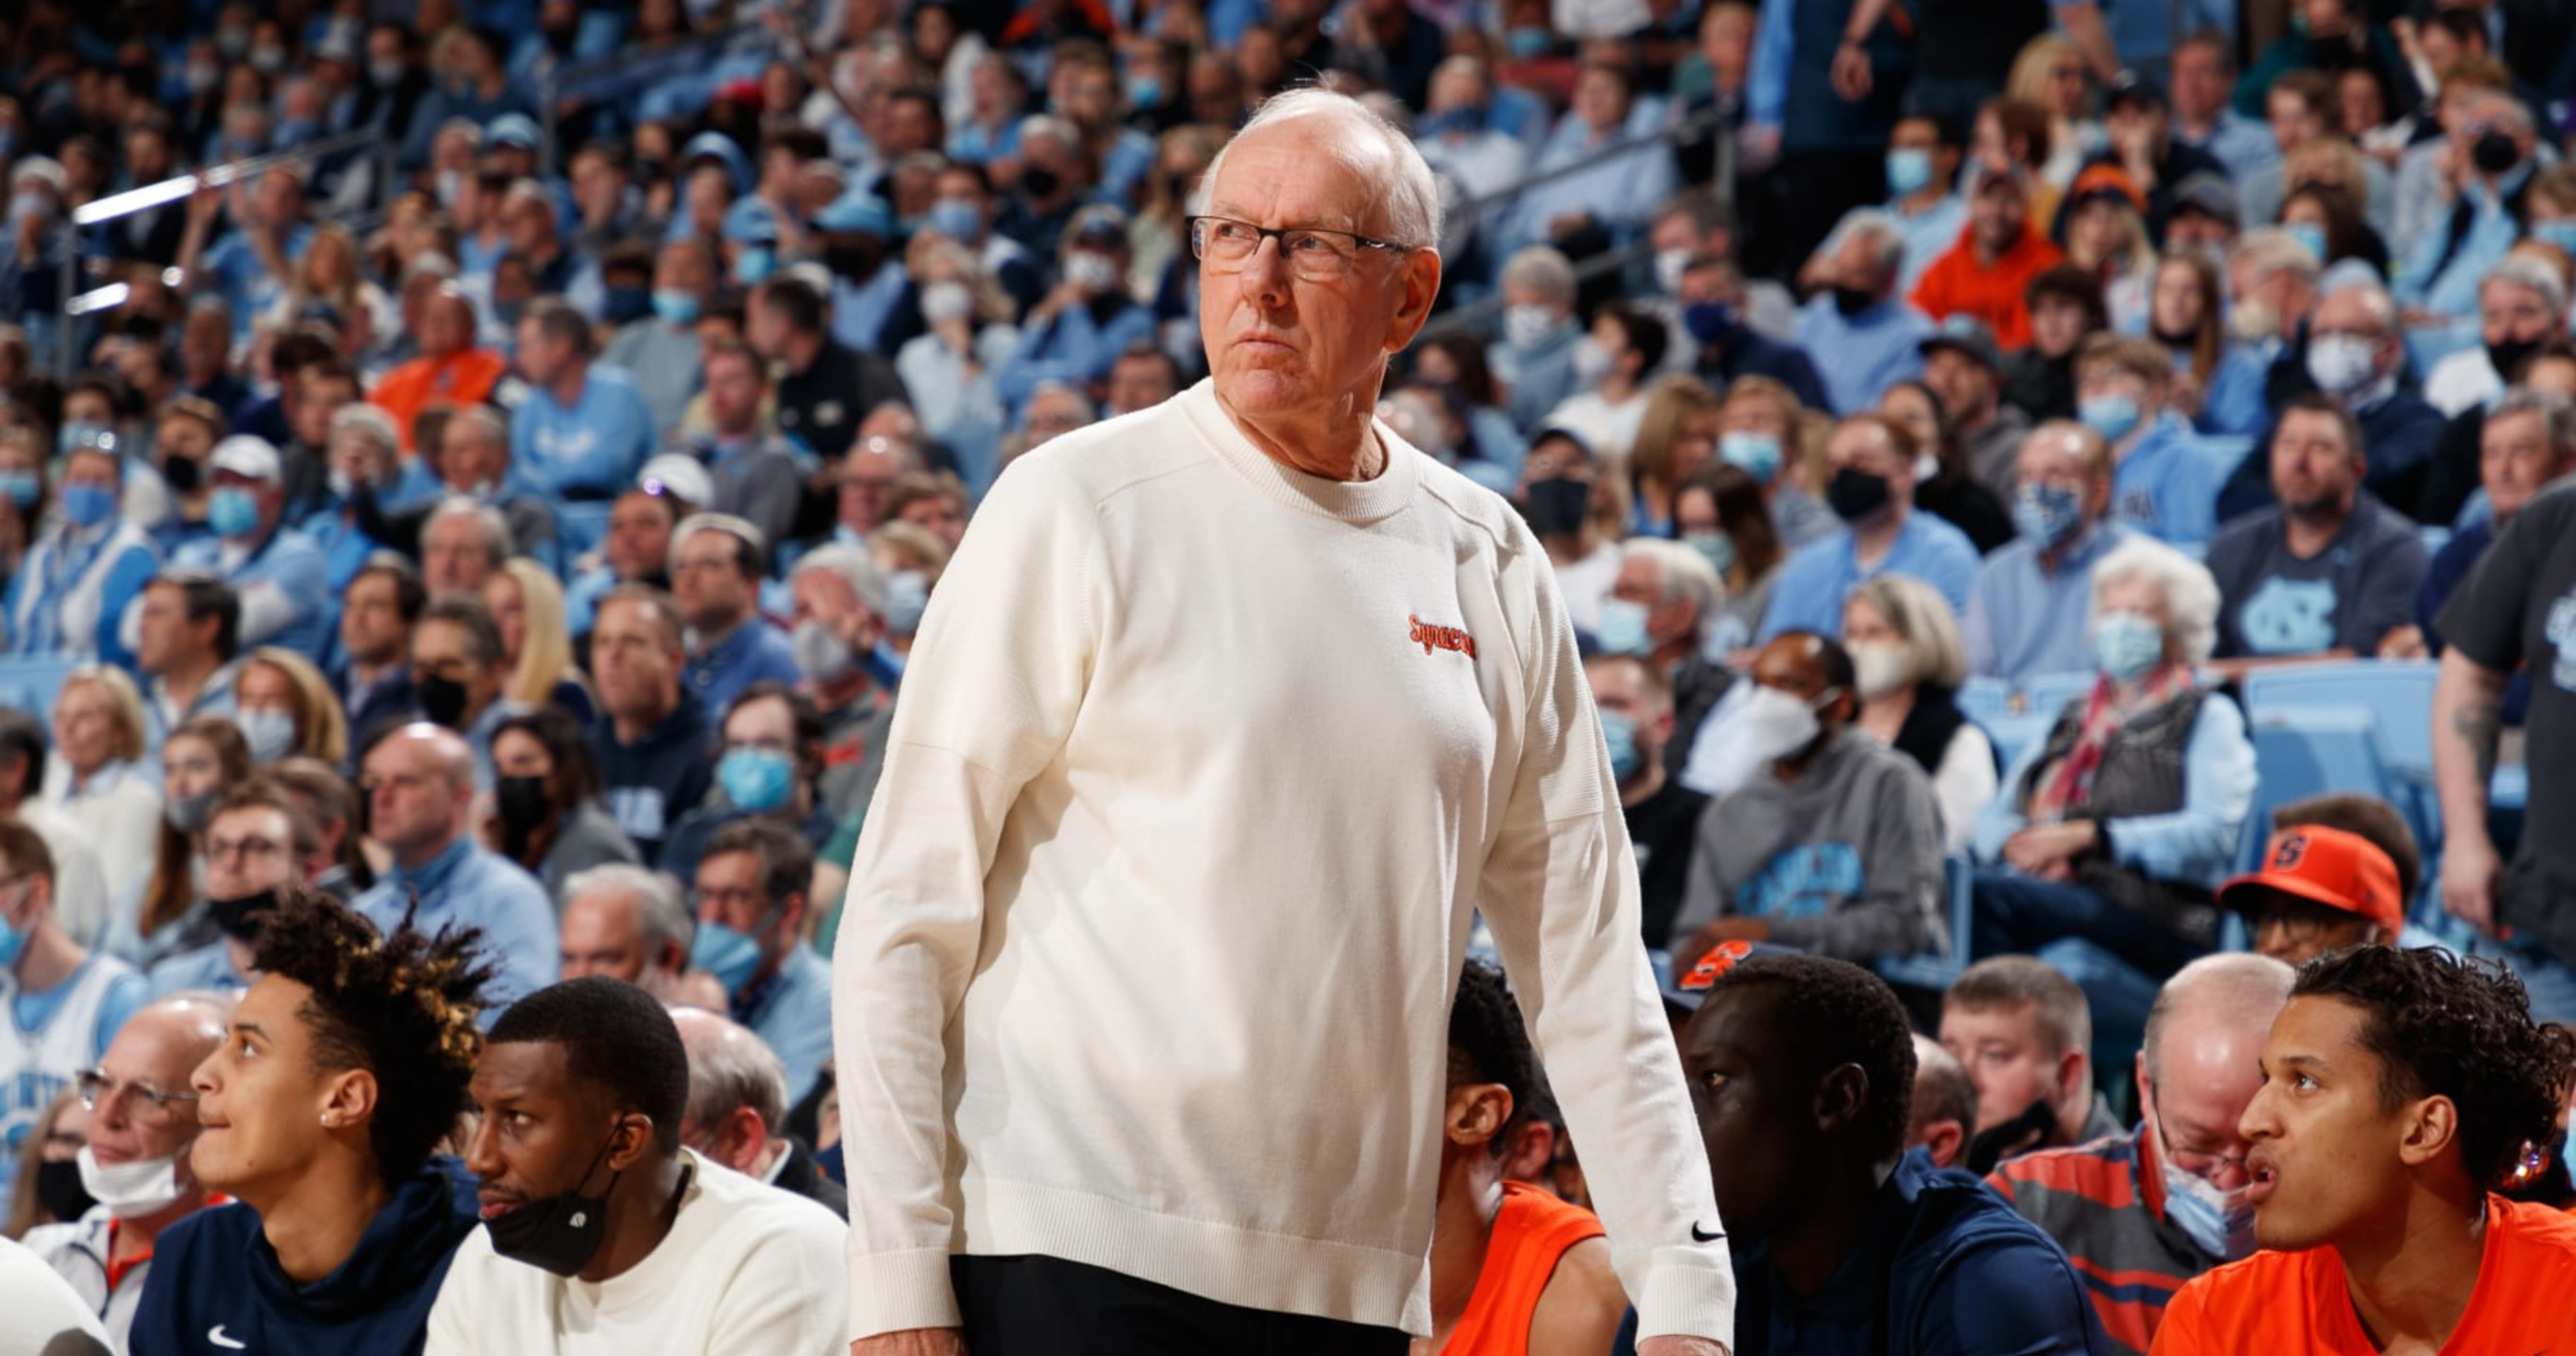 Syracuse's Jim Boeheim Rips Big Ten Basketball: 'They Sucked in the Tournament'